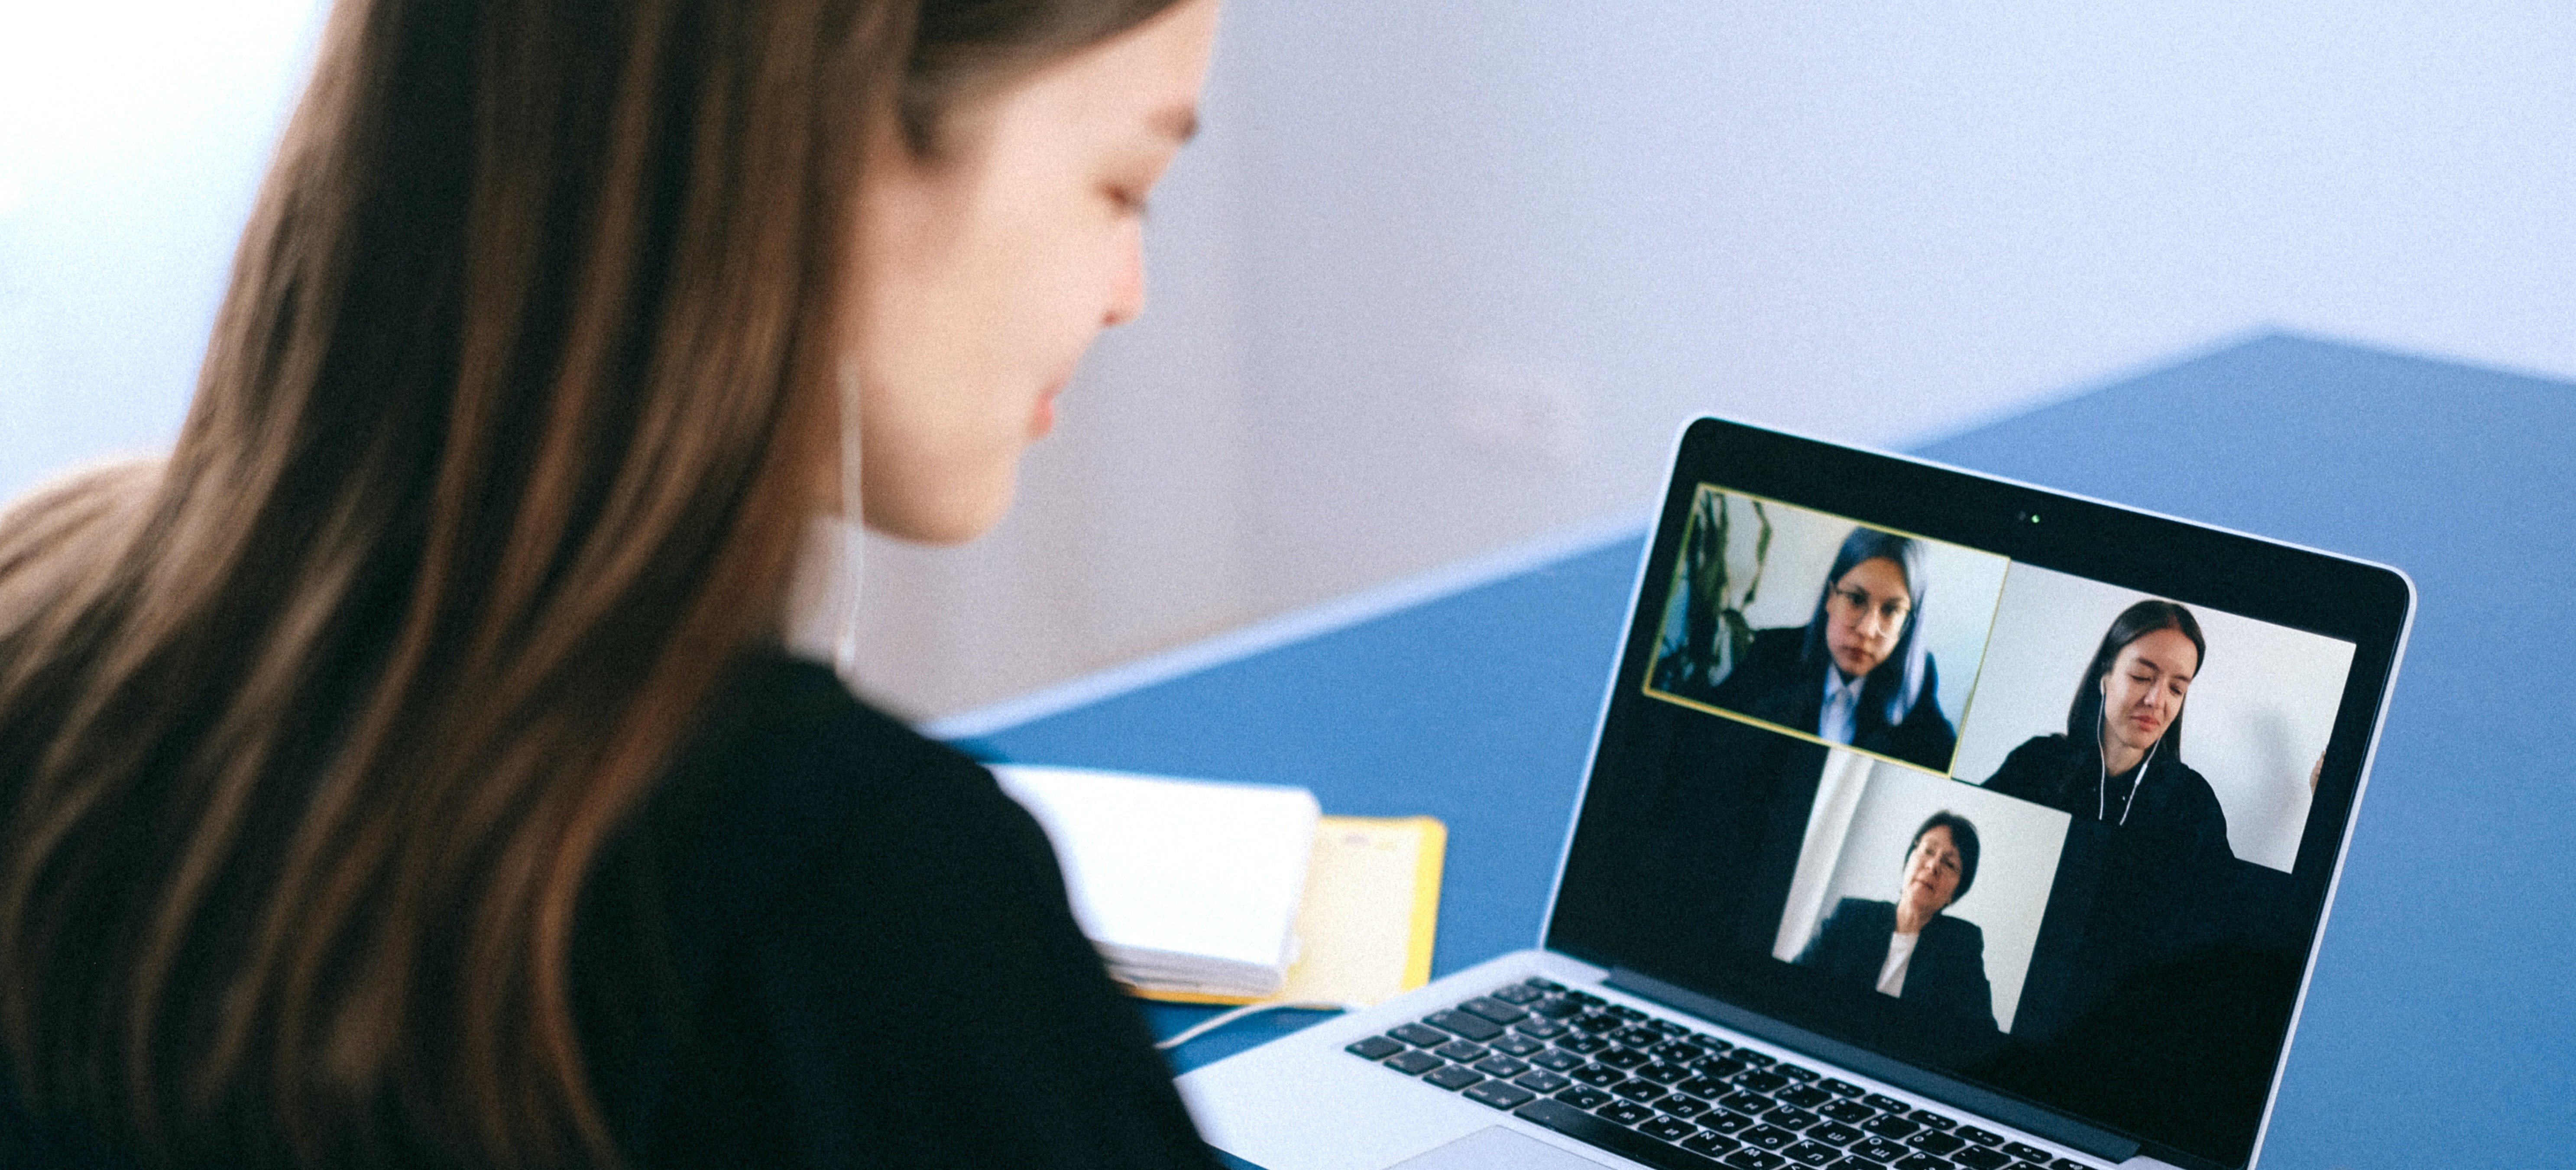 video consultations improve customer experience